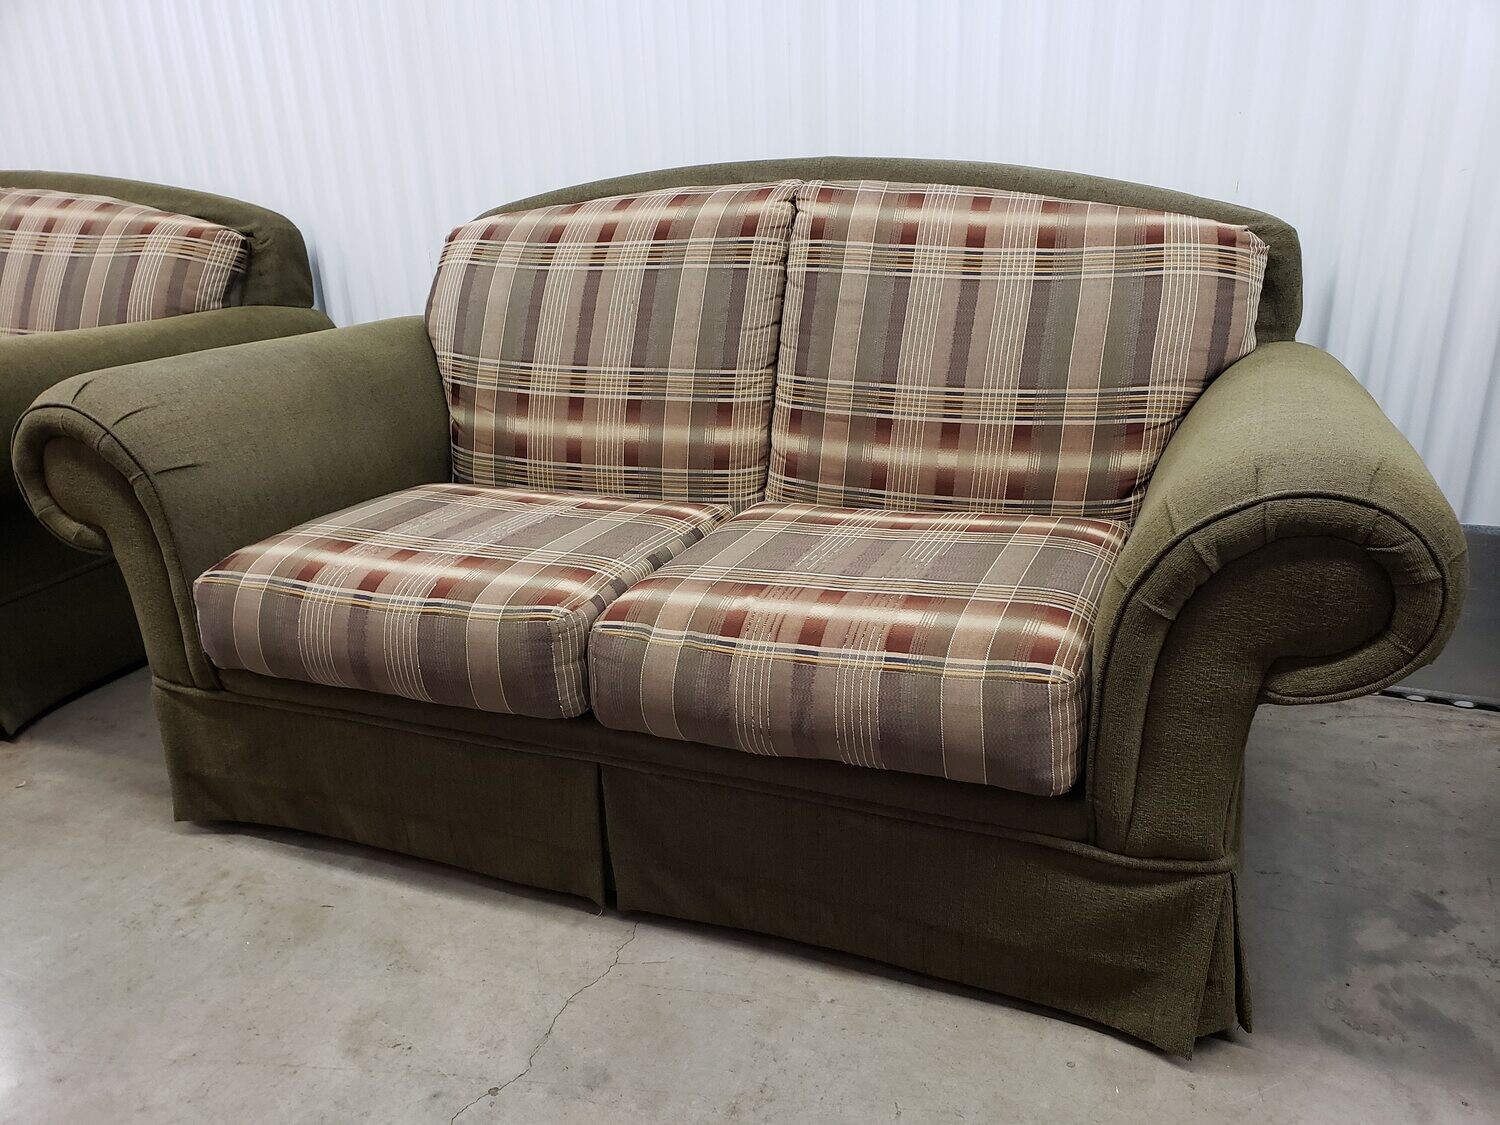 Sage Green Loveseat, plaid seats #2199 - TO FAMILY 2/15/23